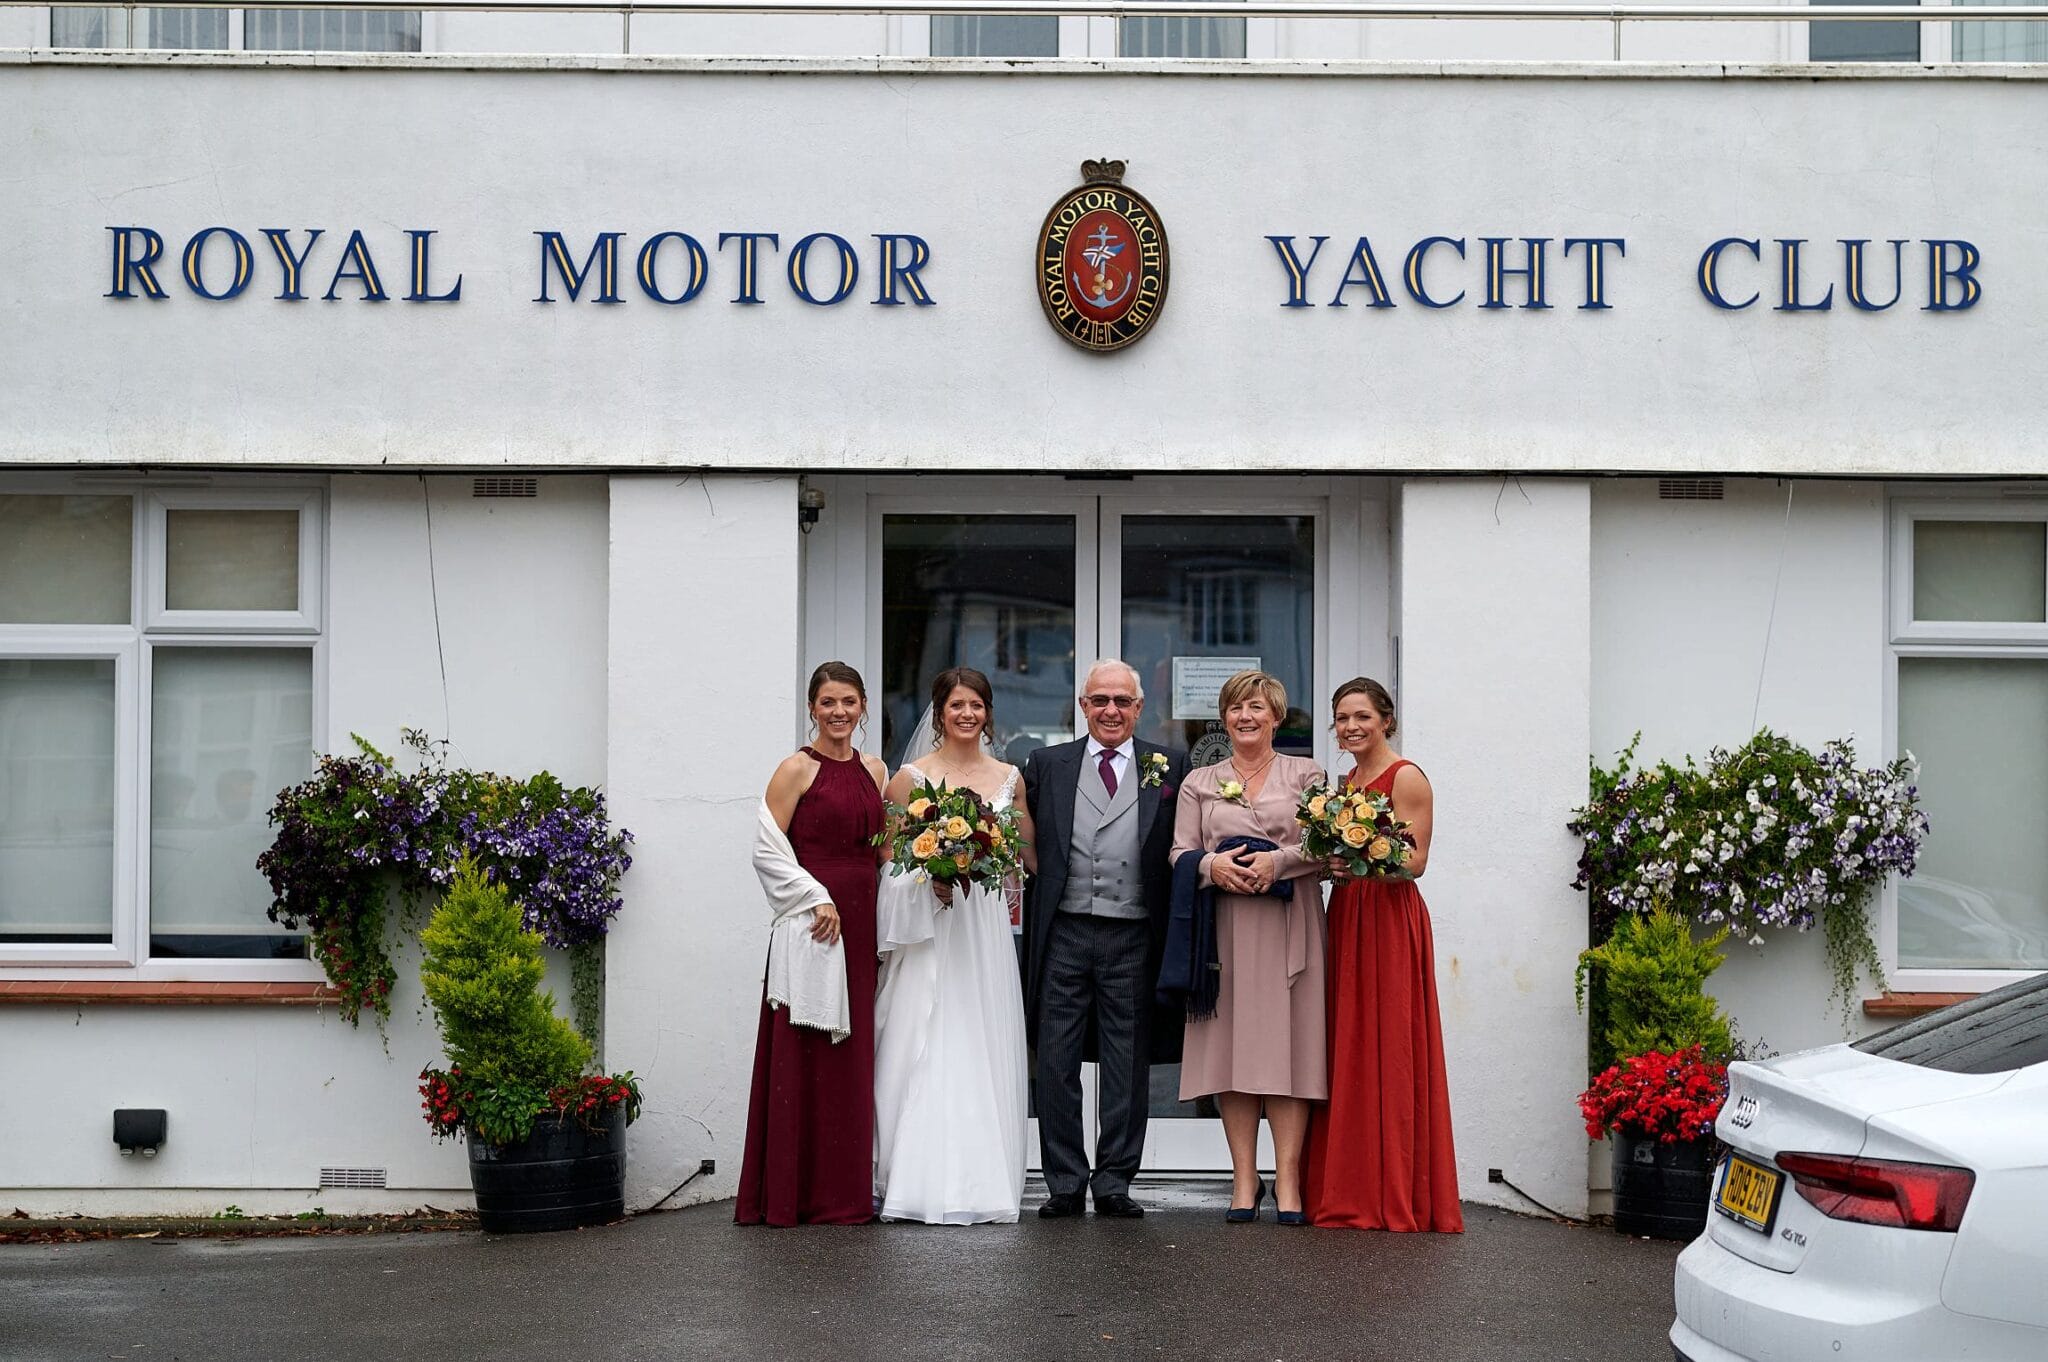 Wedding party outside the Royal Motor Club in Poole